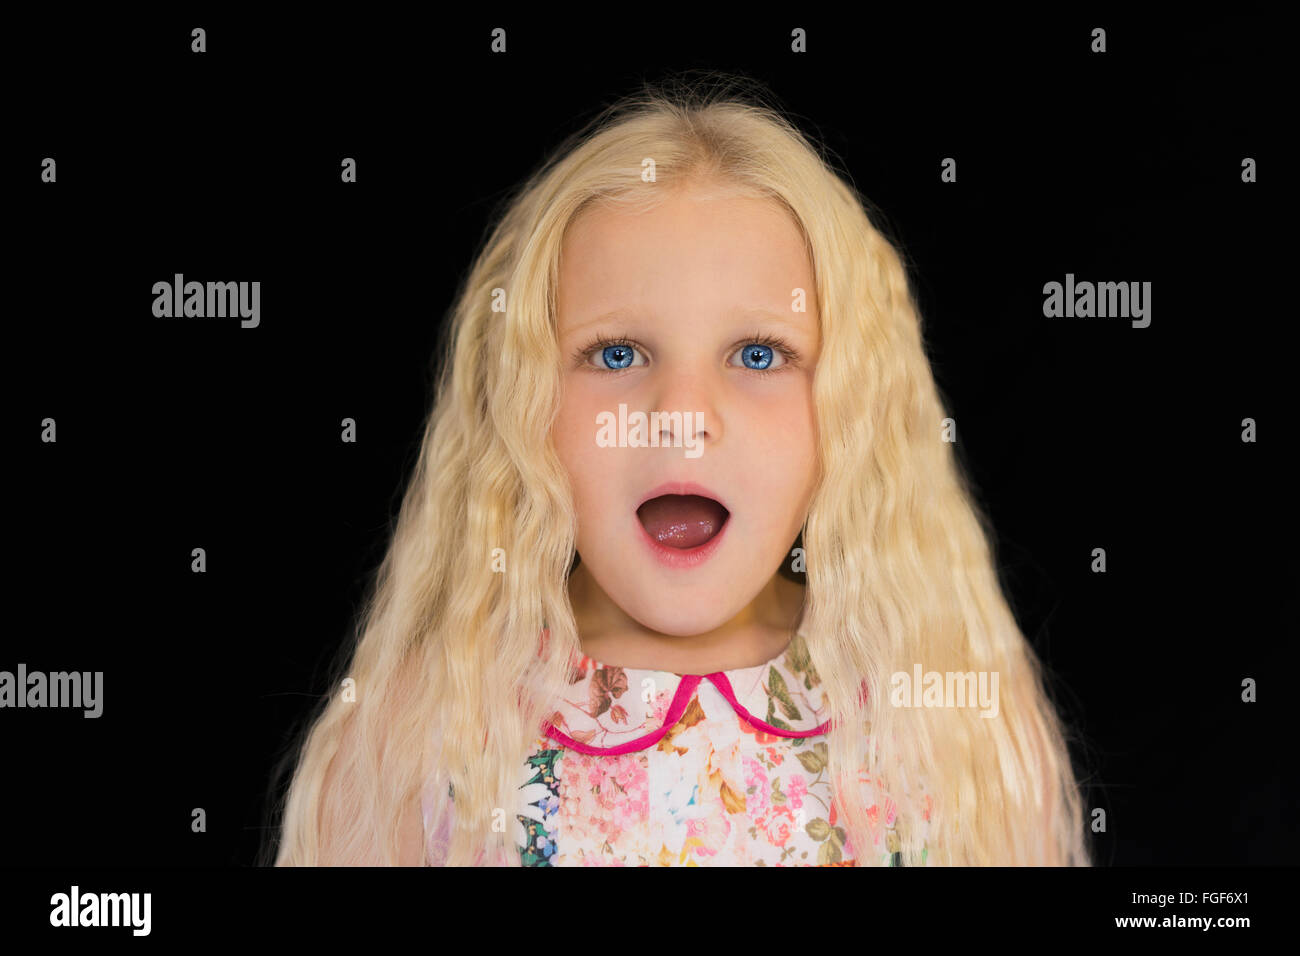 Young girl with long blonde hair with a surprised expression standing against a black background Stock Photo